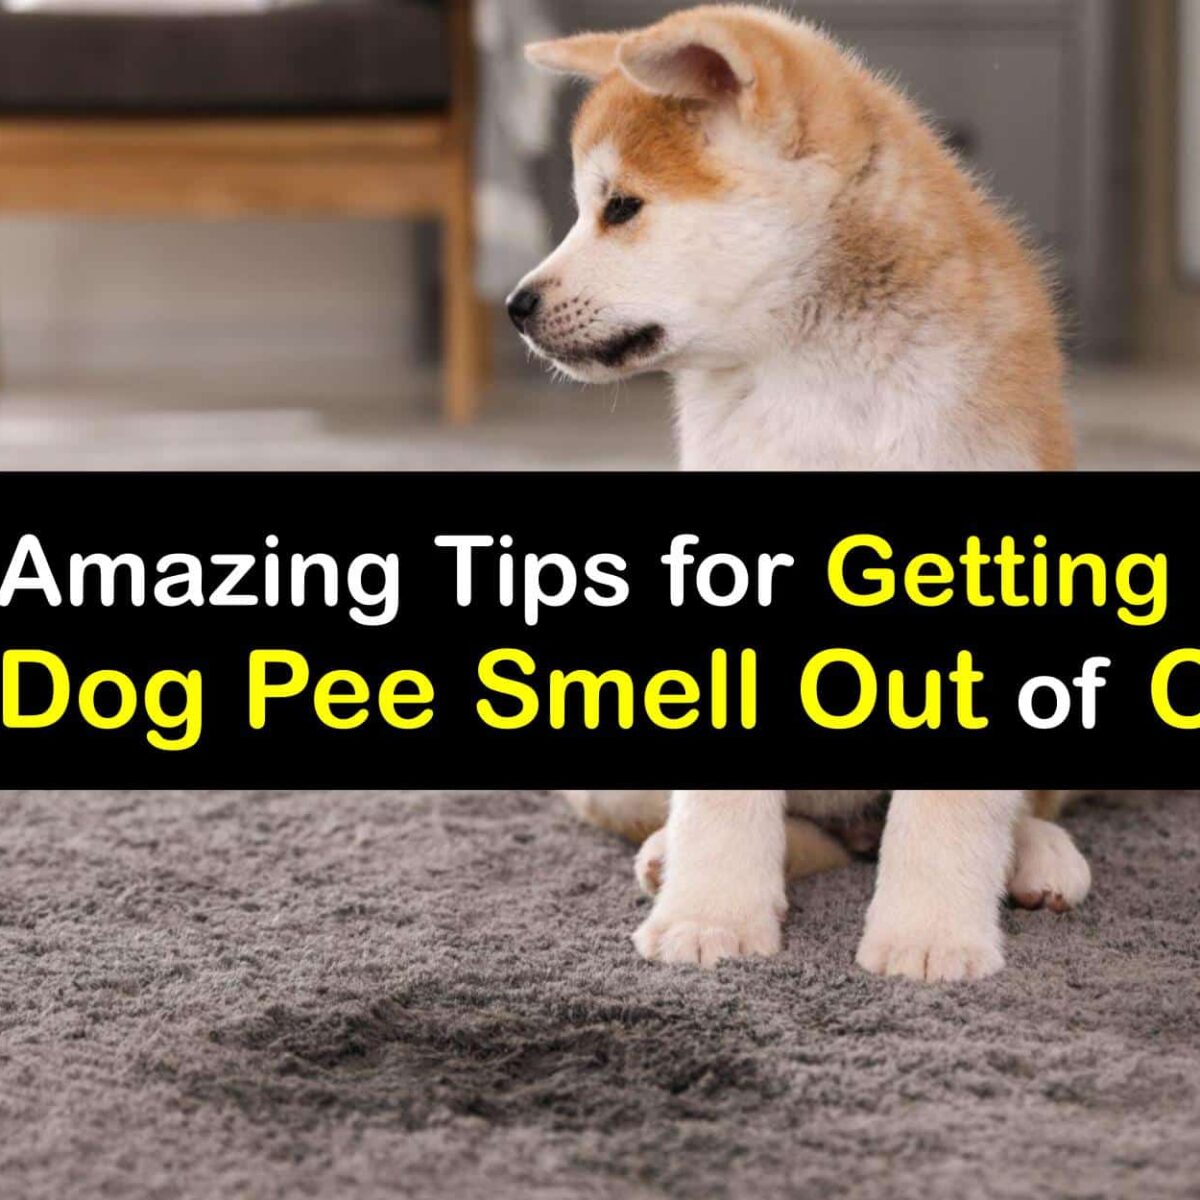 what kills the smell of dog urine